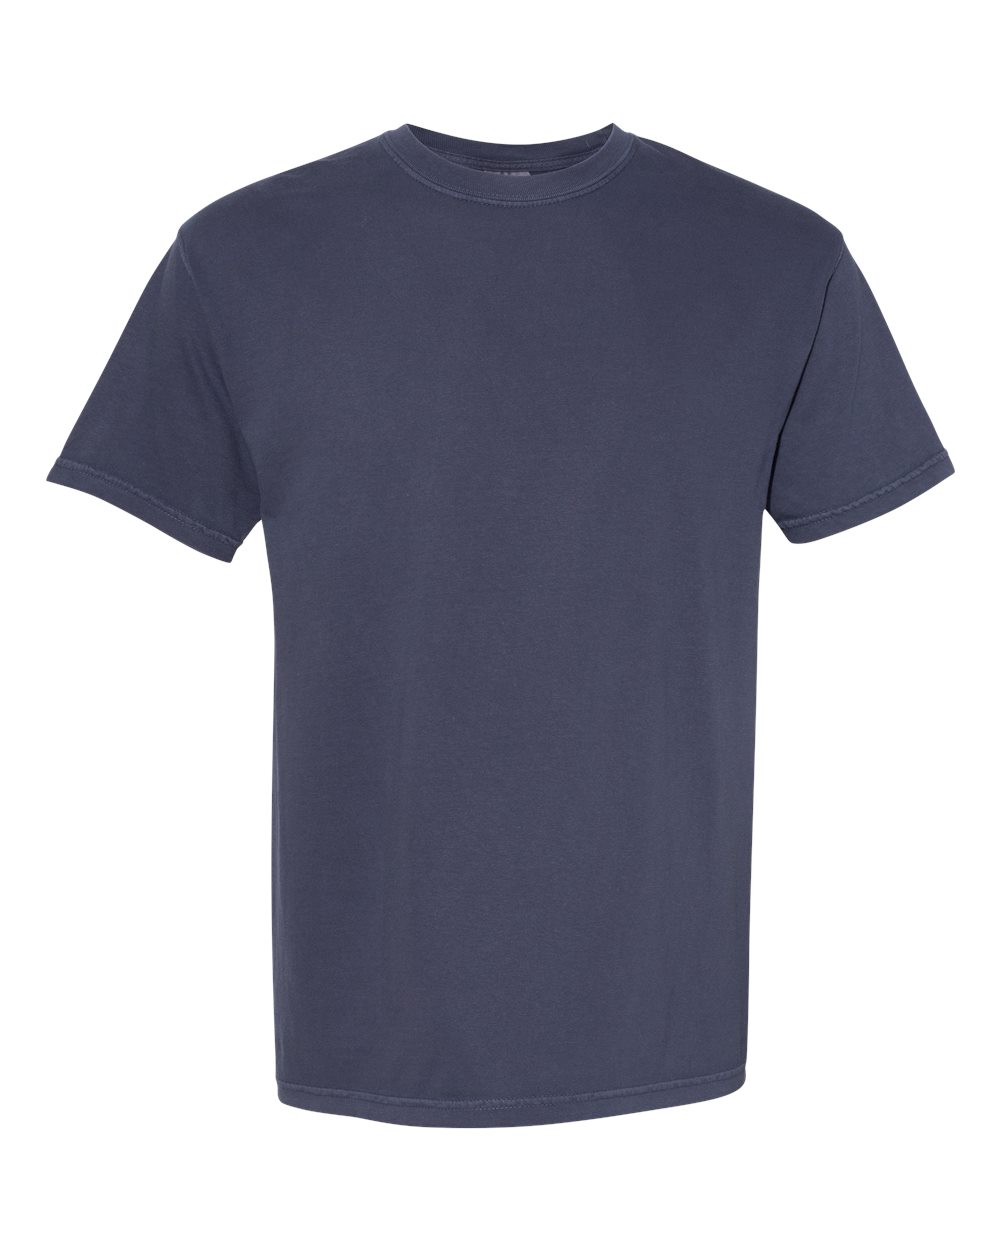 Comfort Colors Garment-Dyed Tee (1717) in Navy